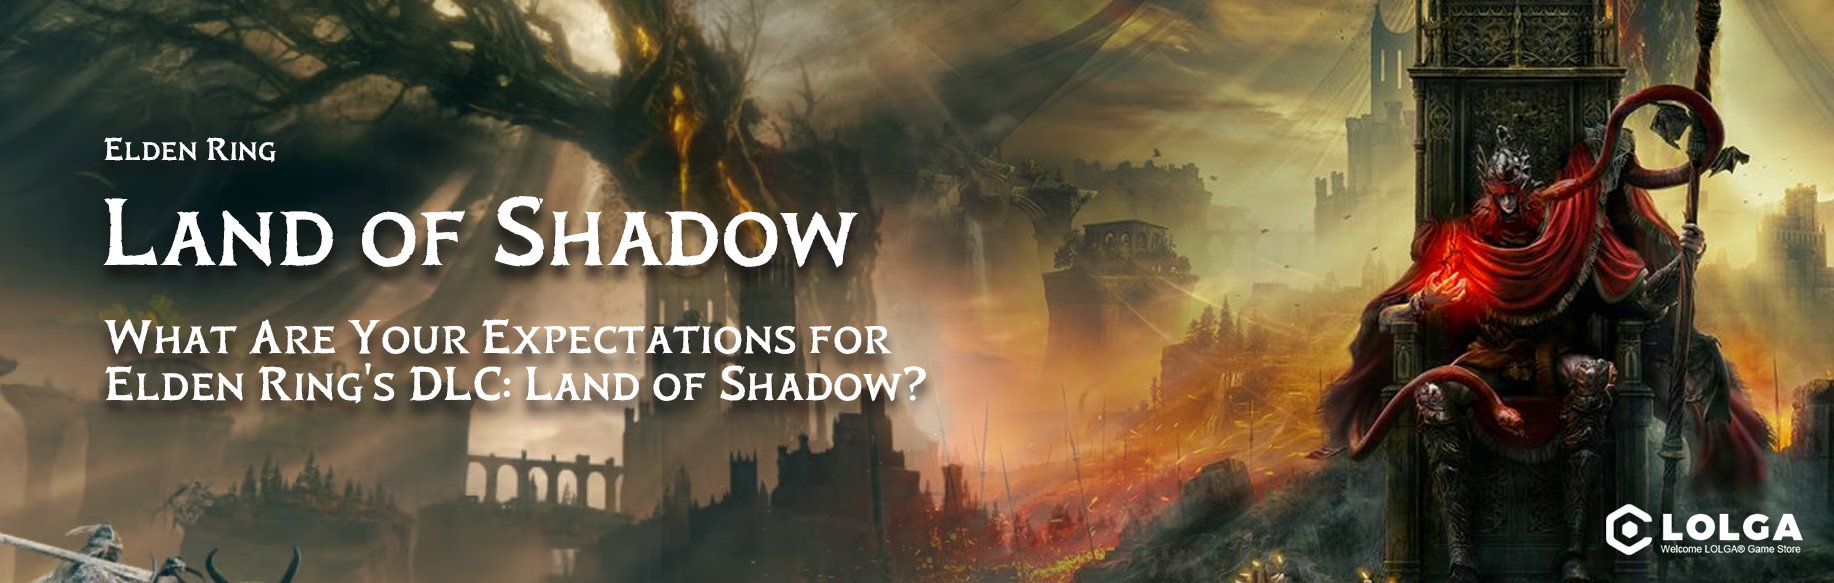 What Are Your Expectations for Elden Ring's DLC: Land of Shadow?